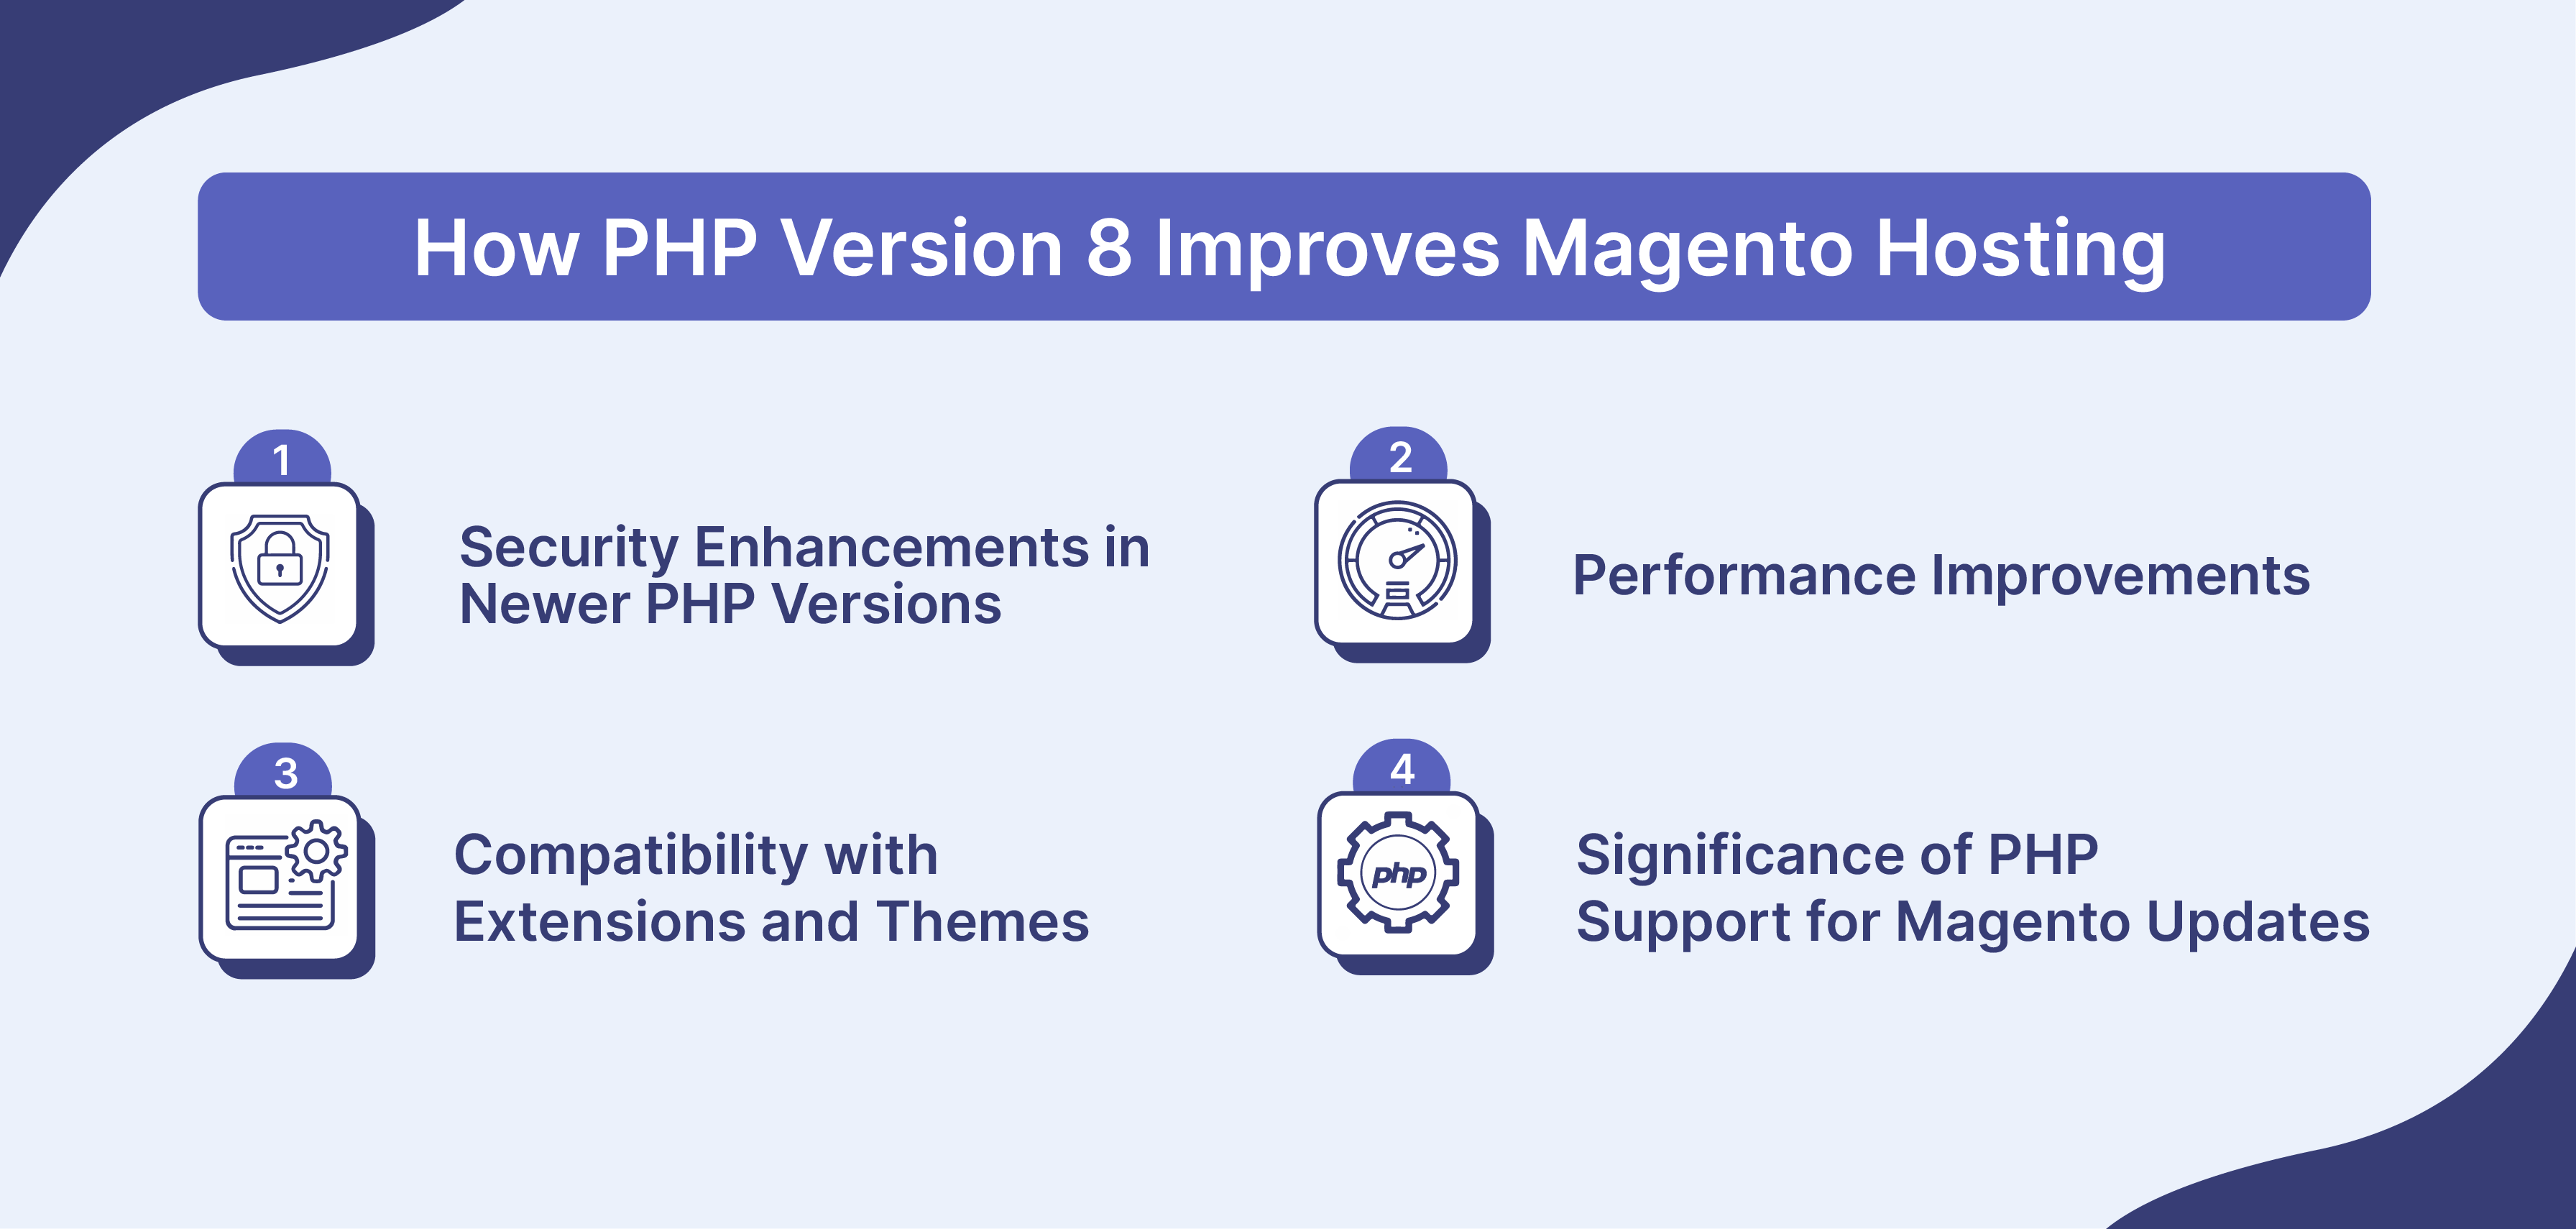 PHP Version 8 Benefits of Top Magento Hosting Providers